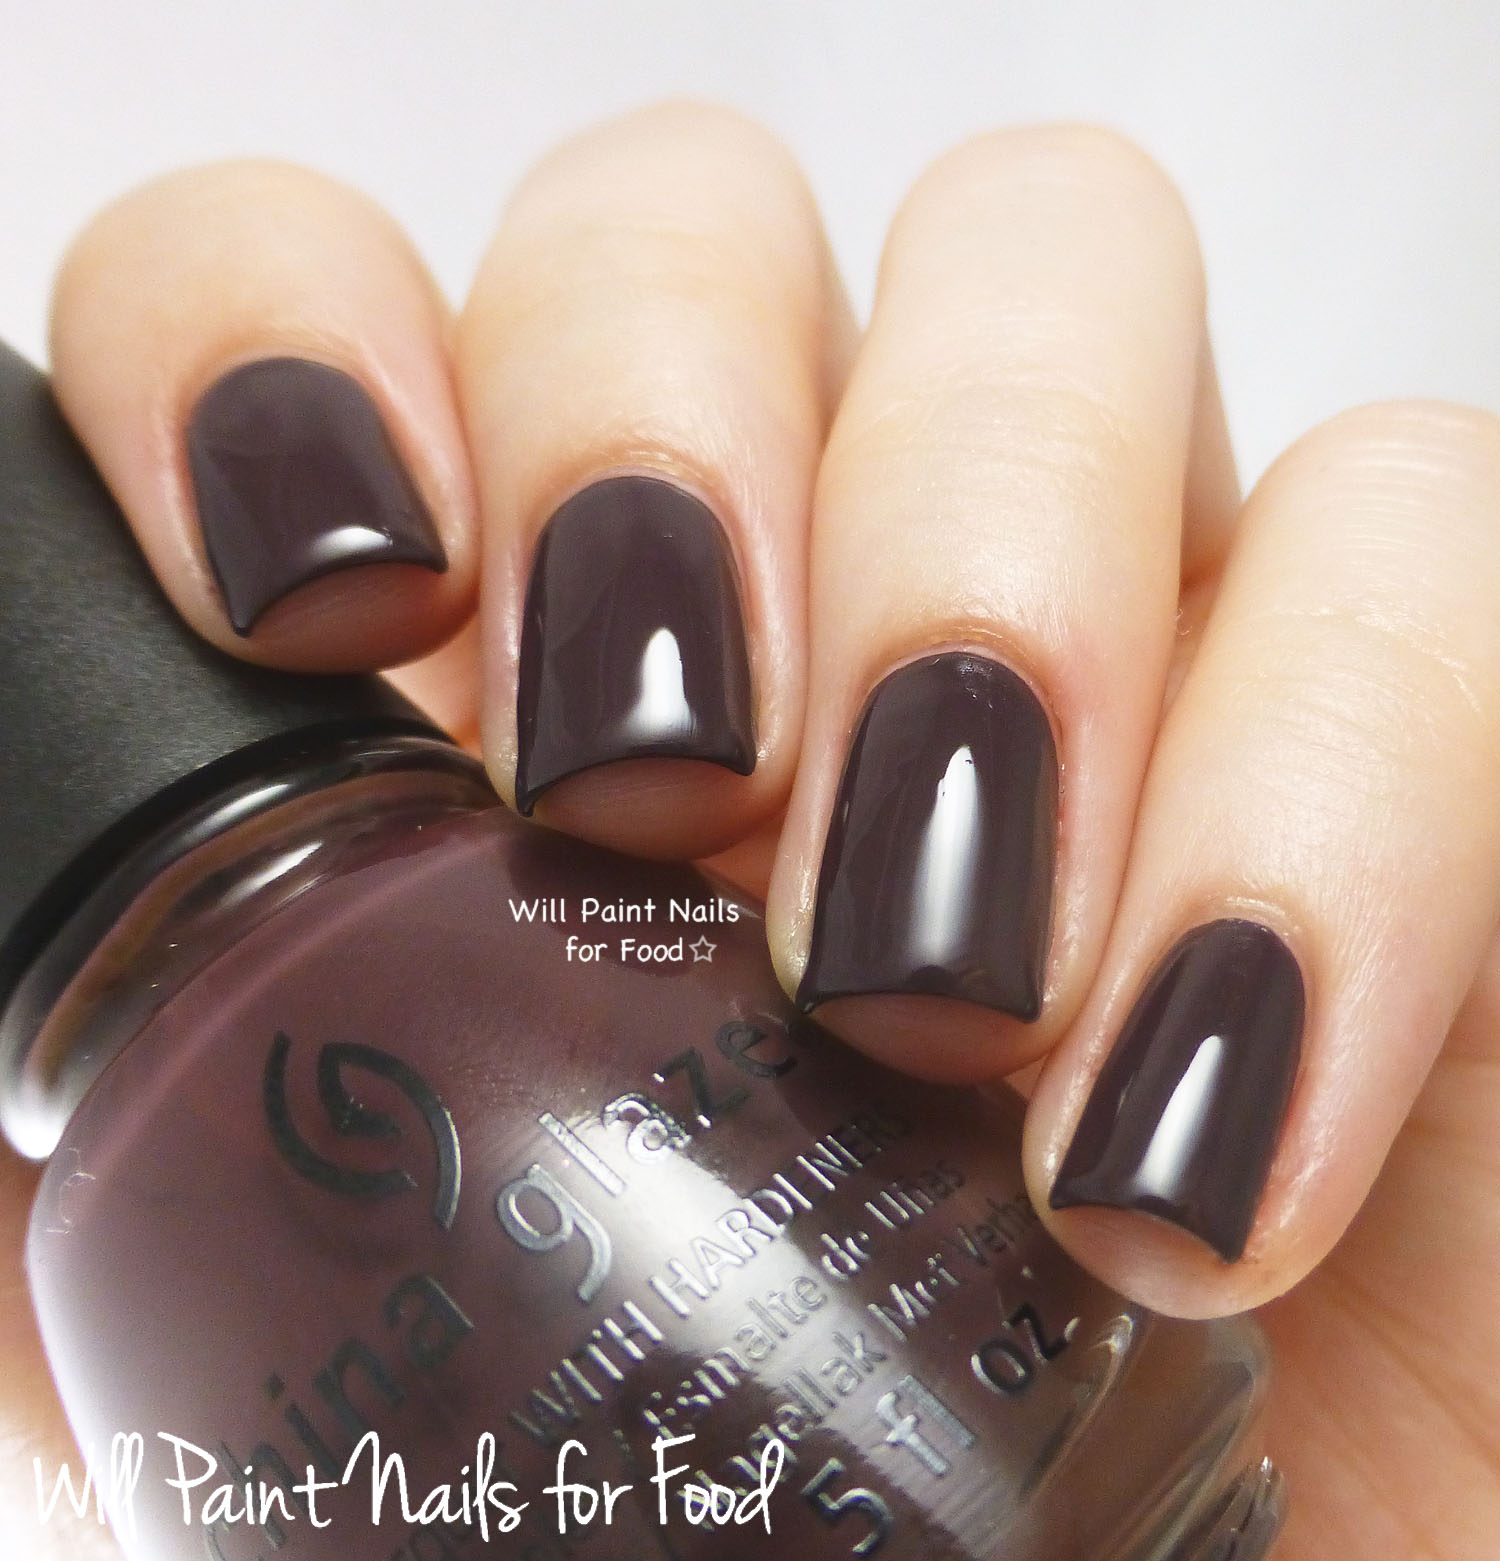 China Glaze What Are You A-Freight Of? swatch